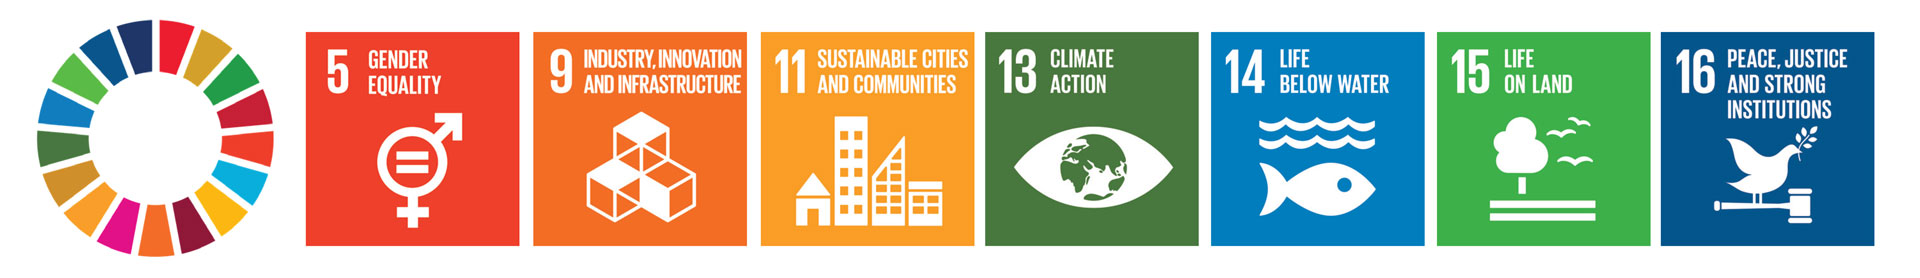 Goal 5 Gender Equality - Goal 9 Industry, innovation and infrastructure - Goal 11 Sustainable Cities and Communities - Goal 13 Climate Action - Goal 14 Life below water - Goal 15 Life on land - Goal 16 Peace, Justice and strong institutions